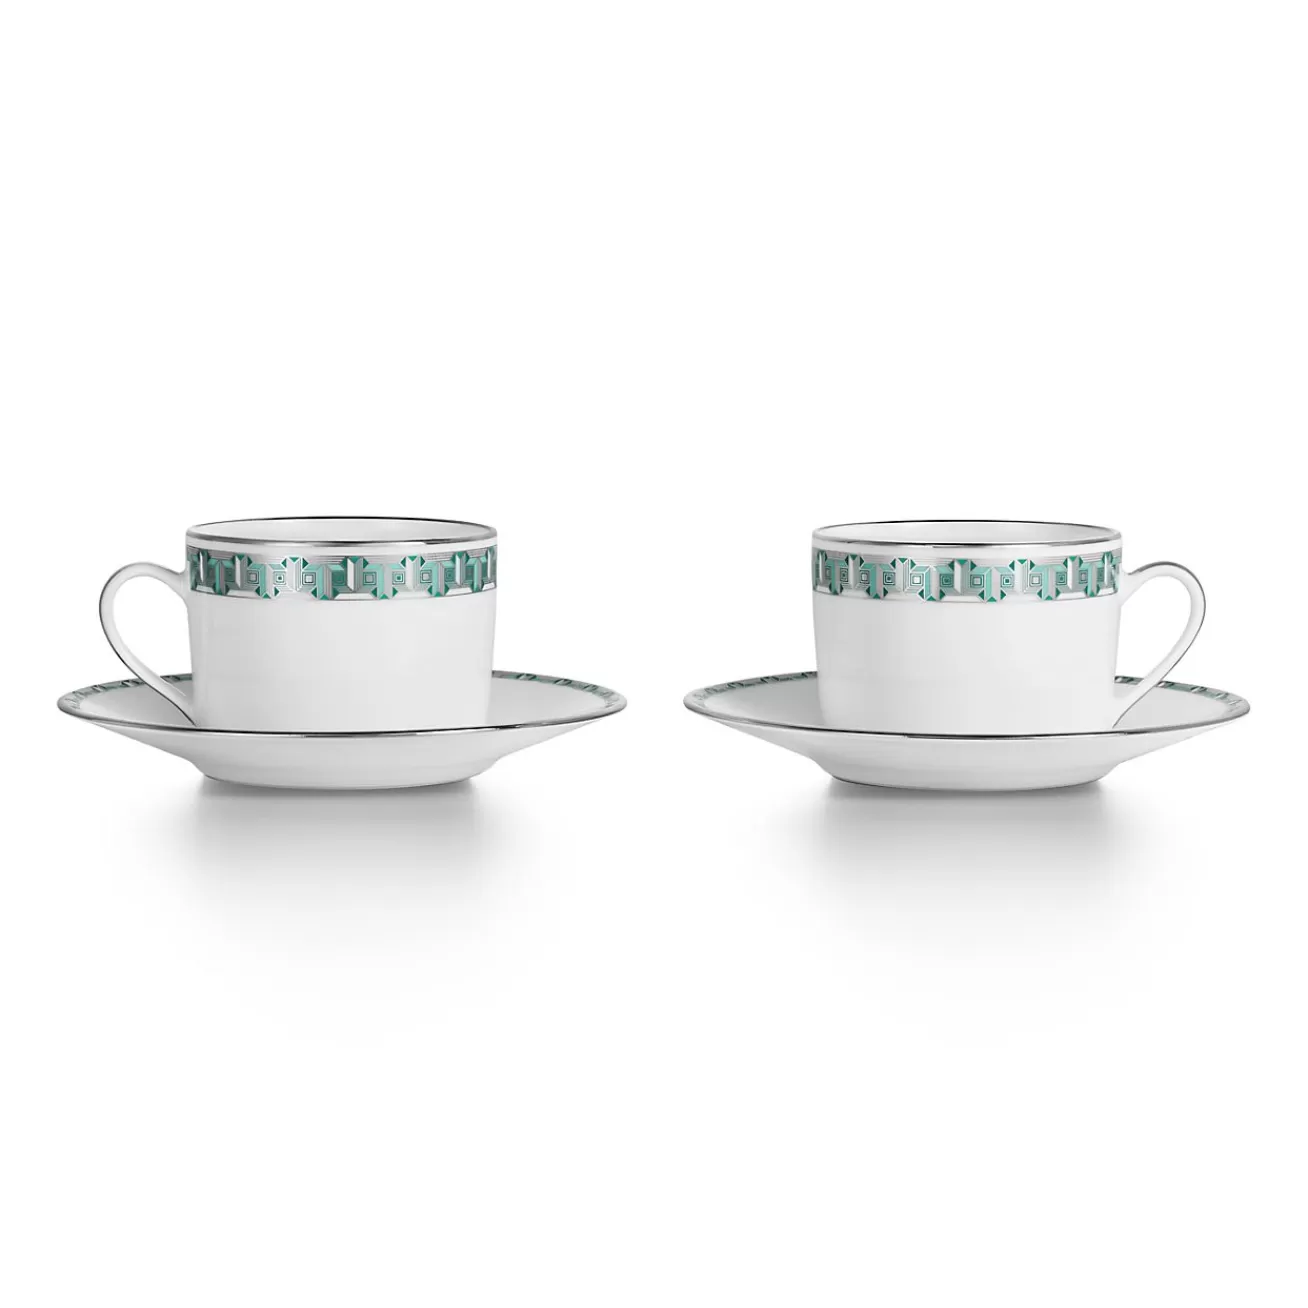 Tiffany & Co. Tiffany Blue Tiffany T True Cup and Saucer Set of Two, with Platinum Rims | ^ The Home | Housewarming Gifts